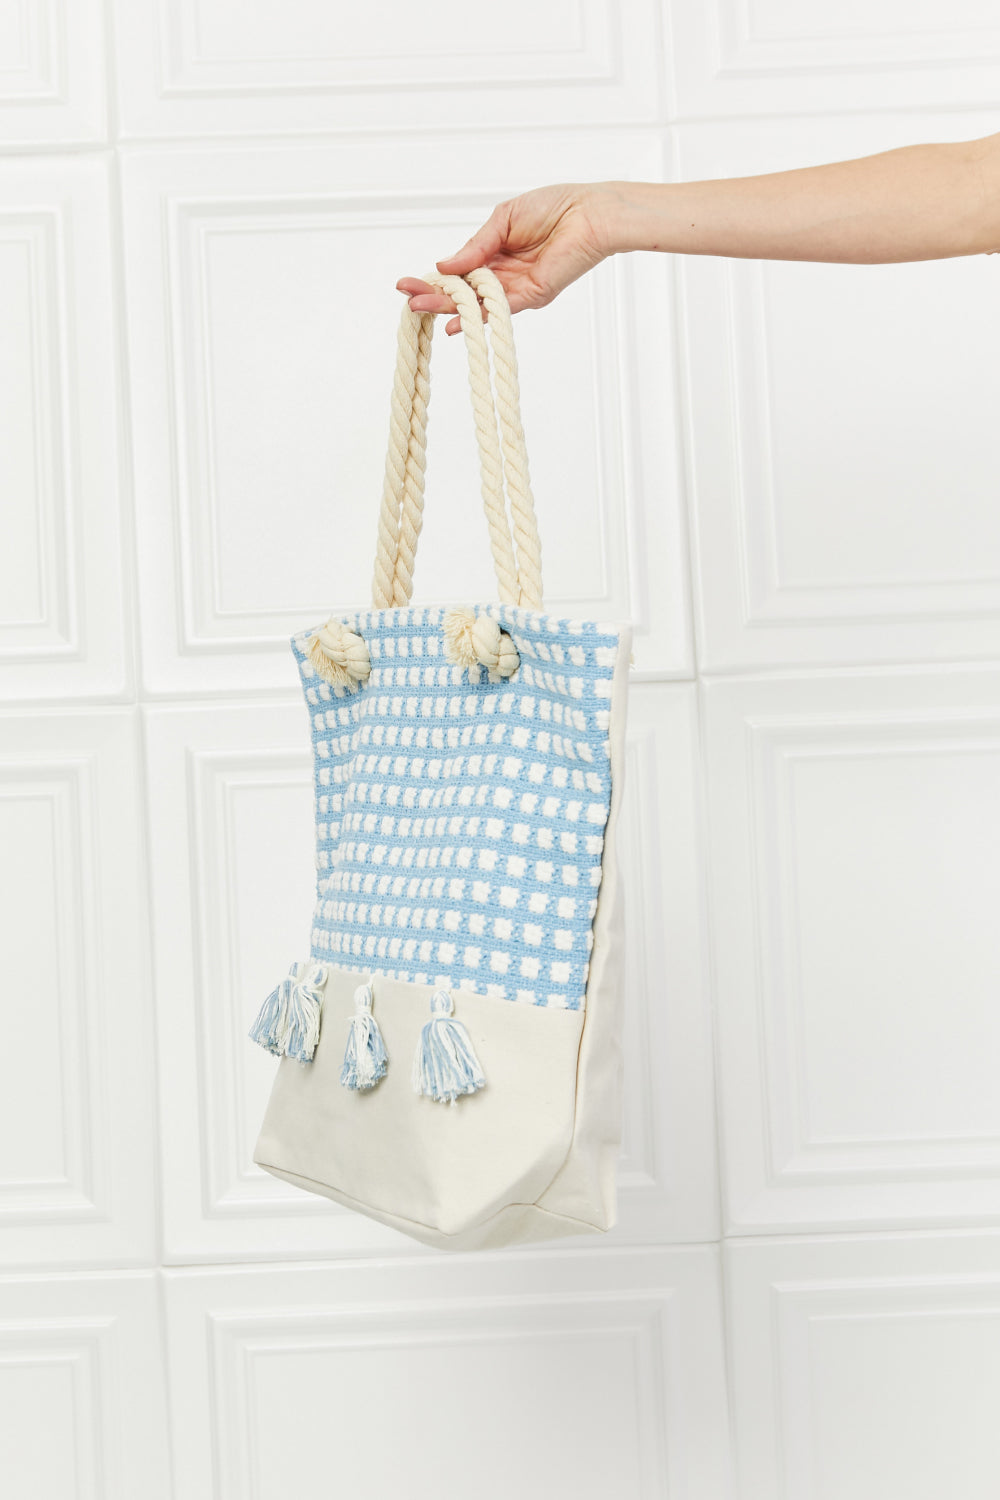 a hand holding a blue and white tote bag